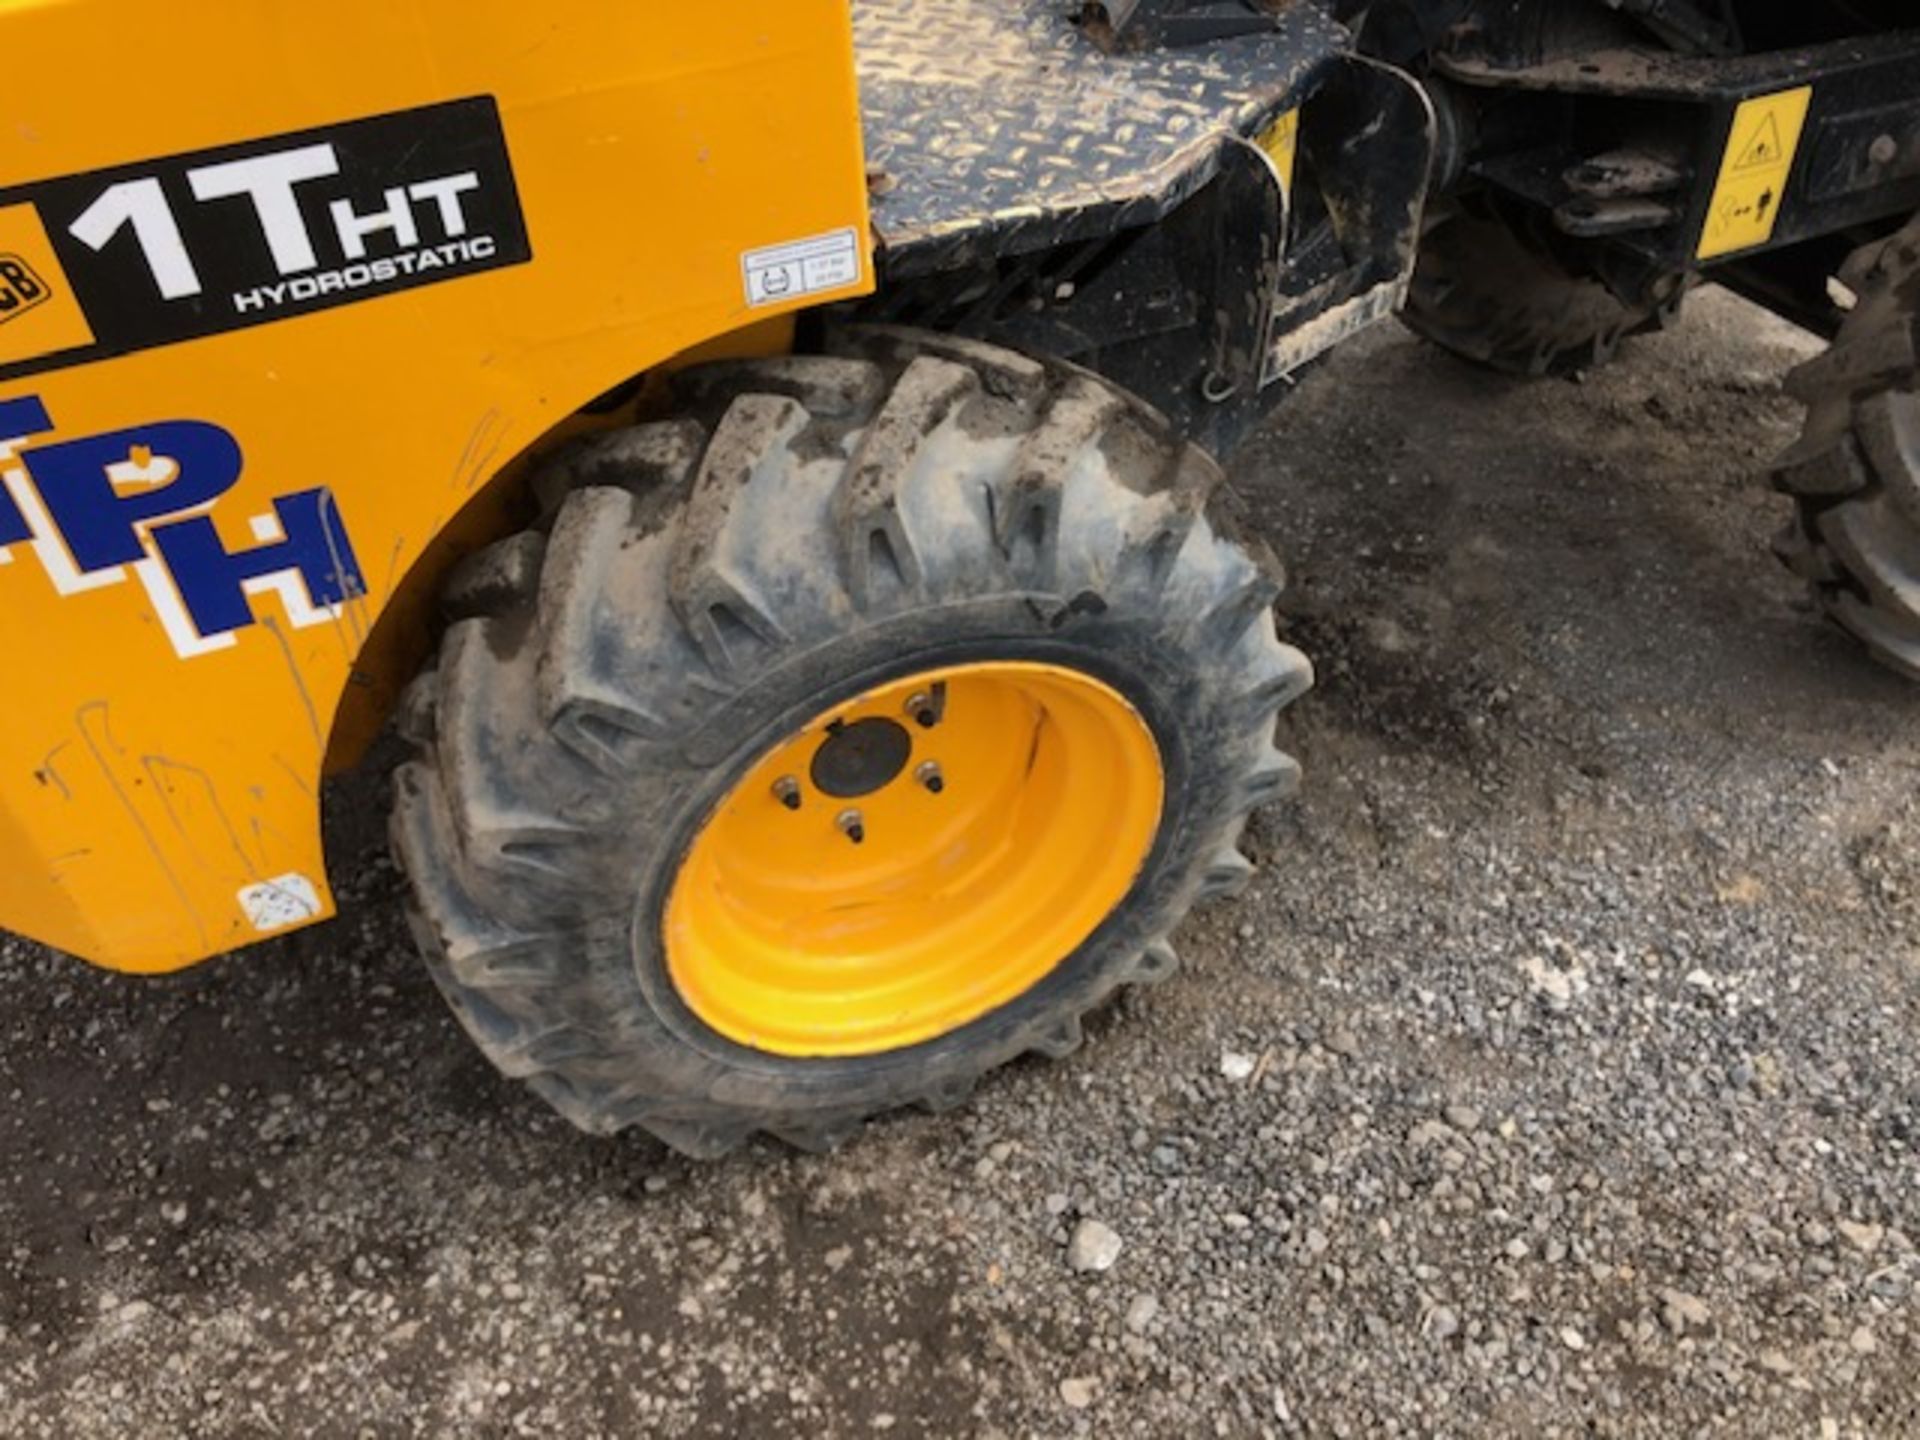 2015 JCB 1THT DUMPER SN: SLBDPPKJEFFRA2567, RECORDED HOURS: 689 WHEN TESTED WAS SEEN TO DRIVE, - Image 4 of 6